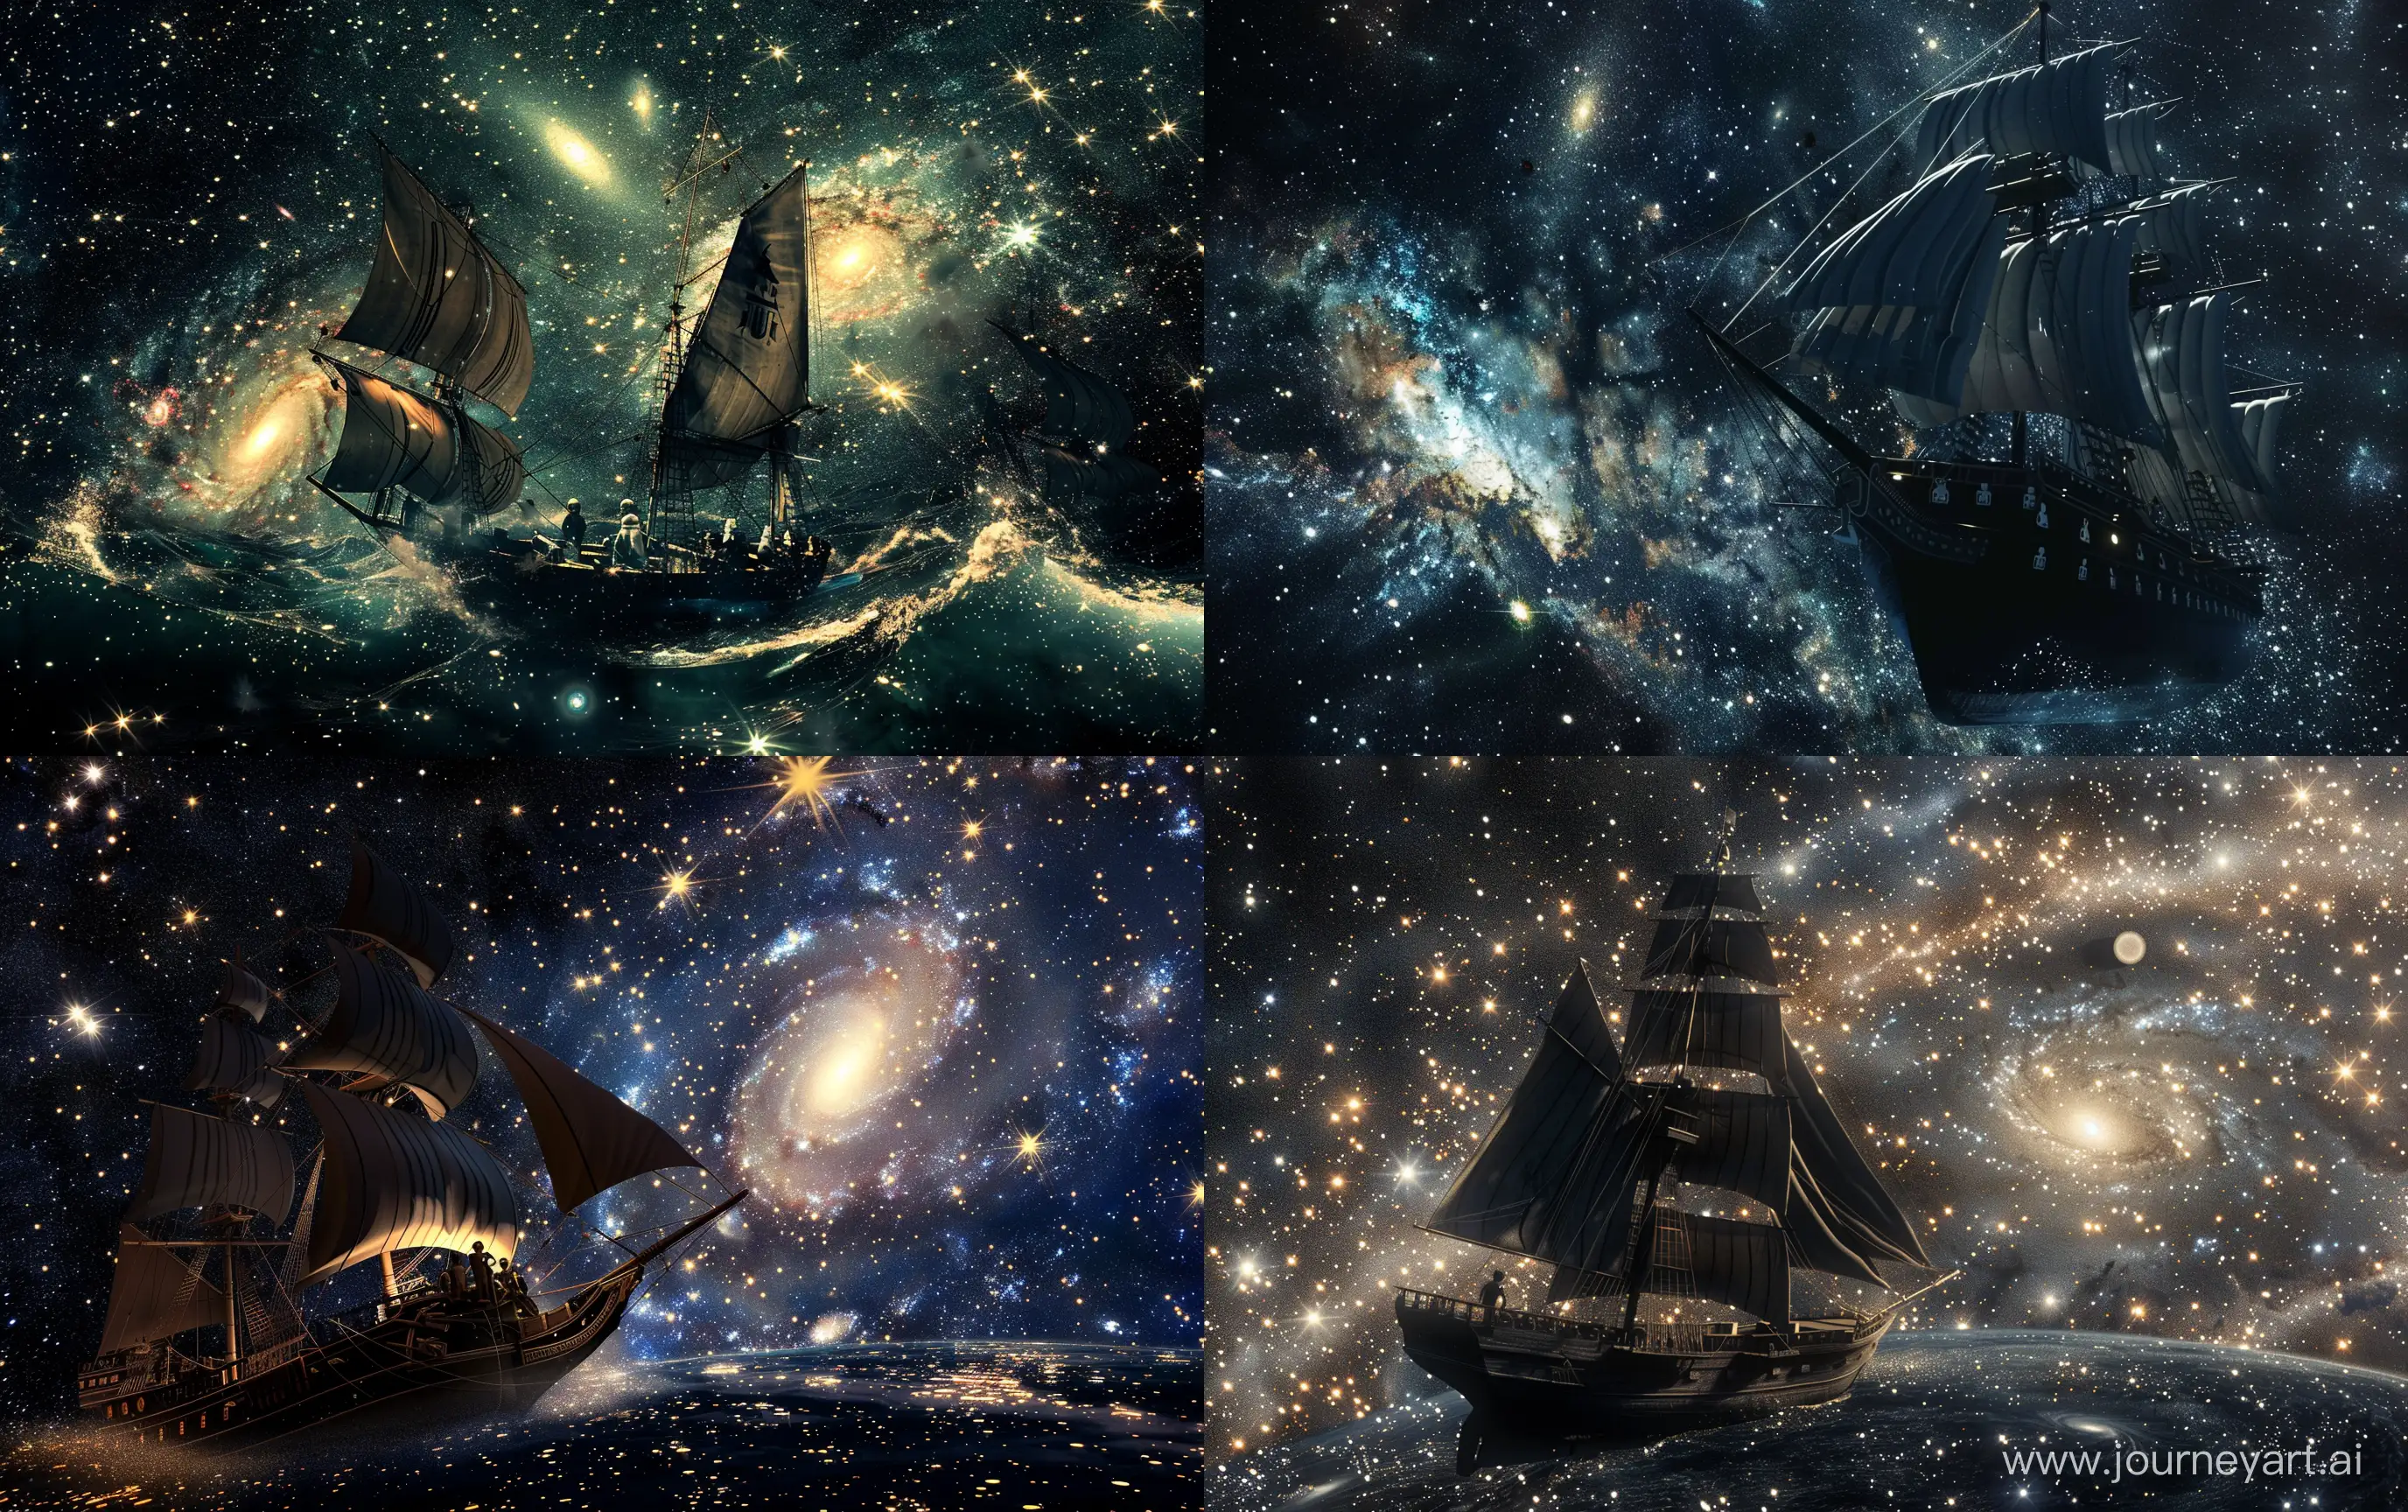 The sailing ship flies in deep space with galaxies and one quasar, a few human silhouettes on the ship, waves of shining stars, super realistic, cinematic --ar 16:10